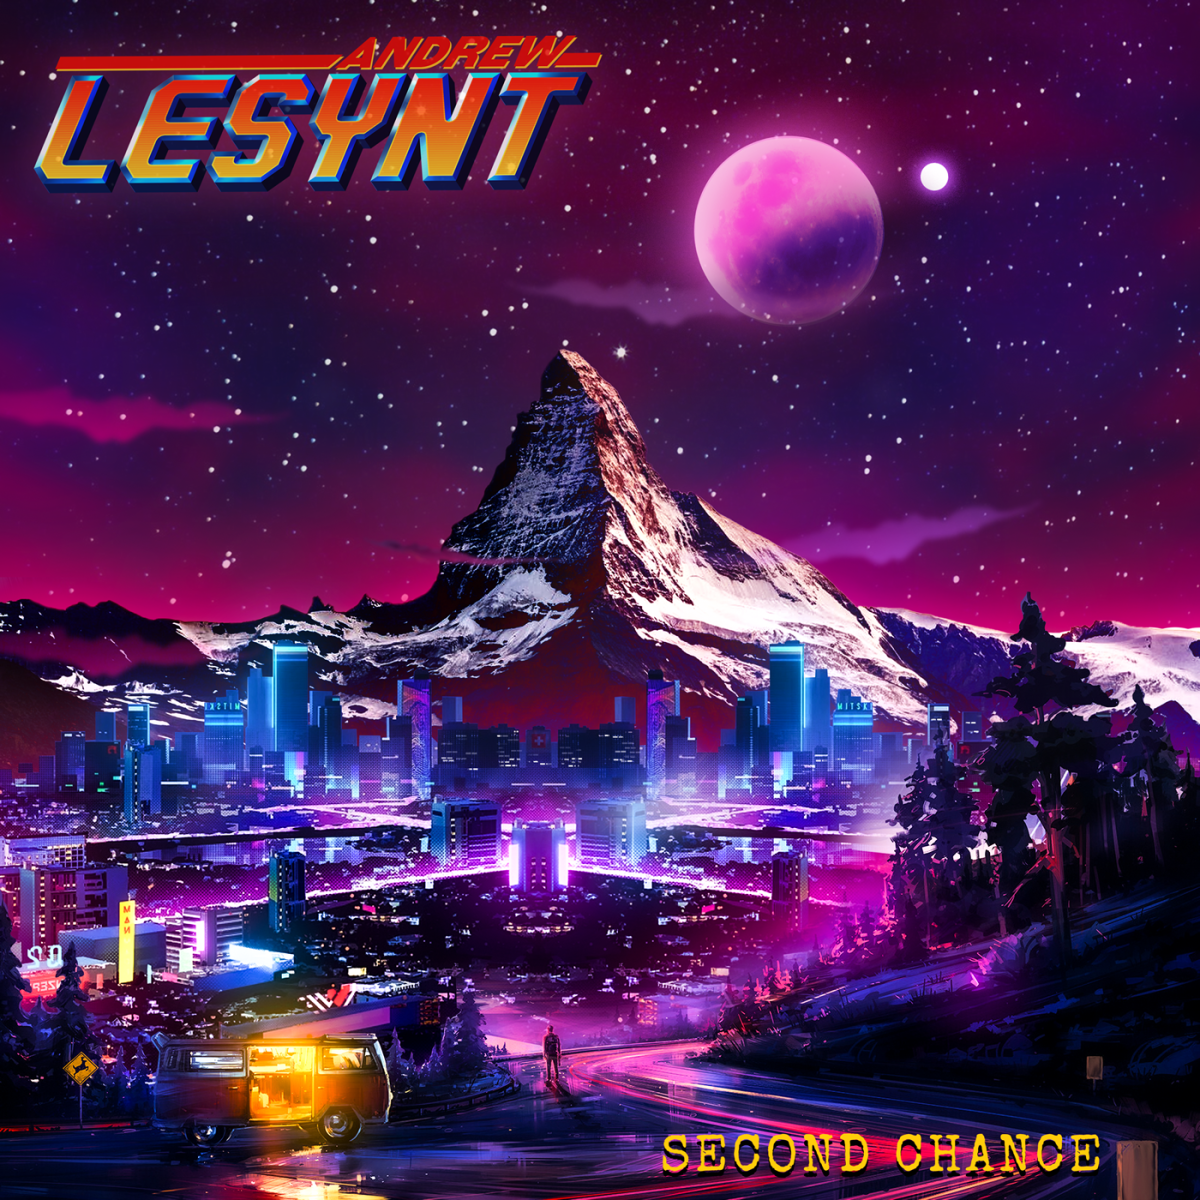 synth-album-review-second-chance-by-andrew-lesynt